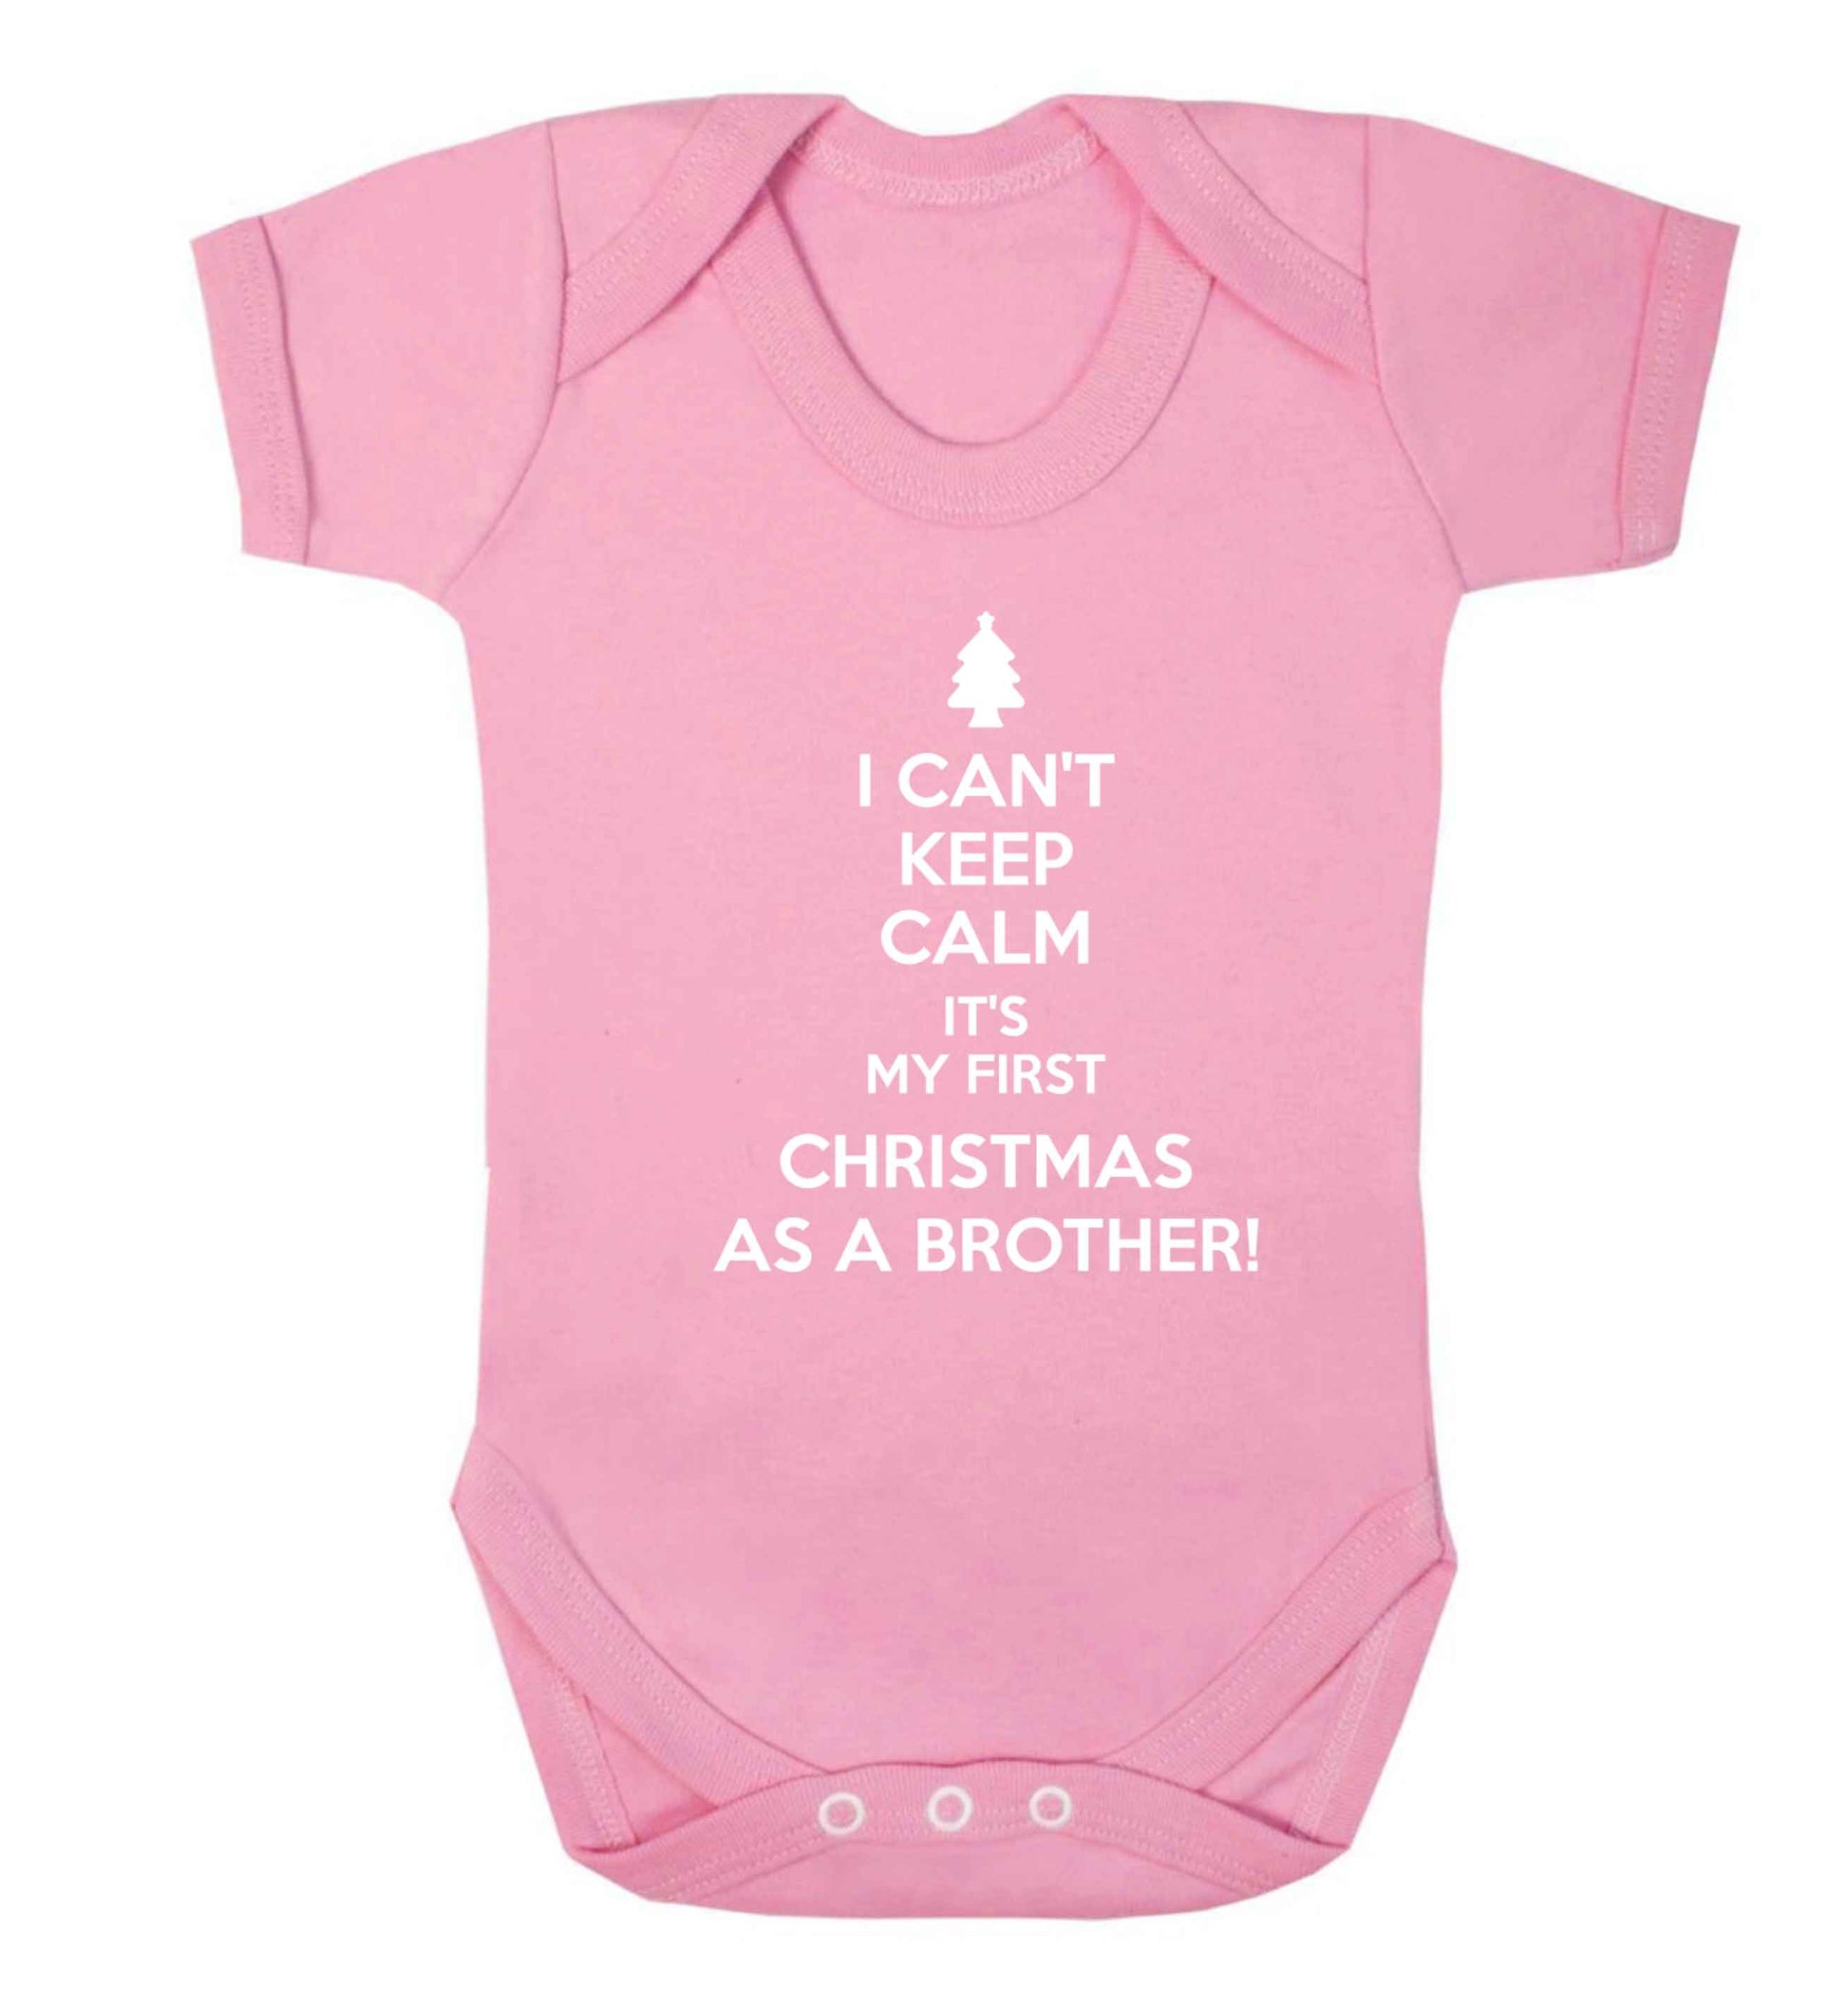 I can't keep calm it's my first Christmas as a brother! Baby Vest pale pink 18-24 months